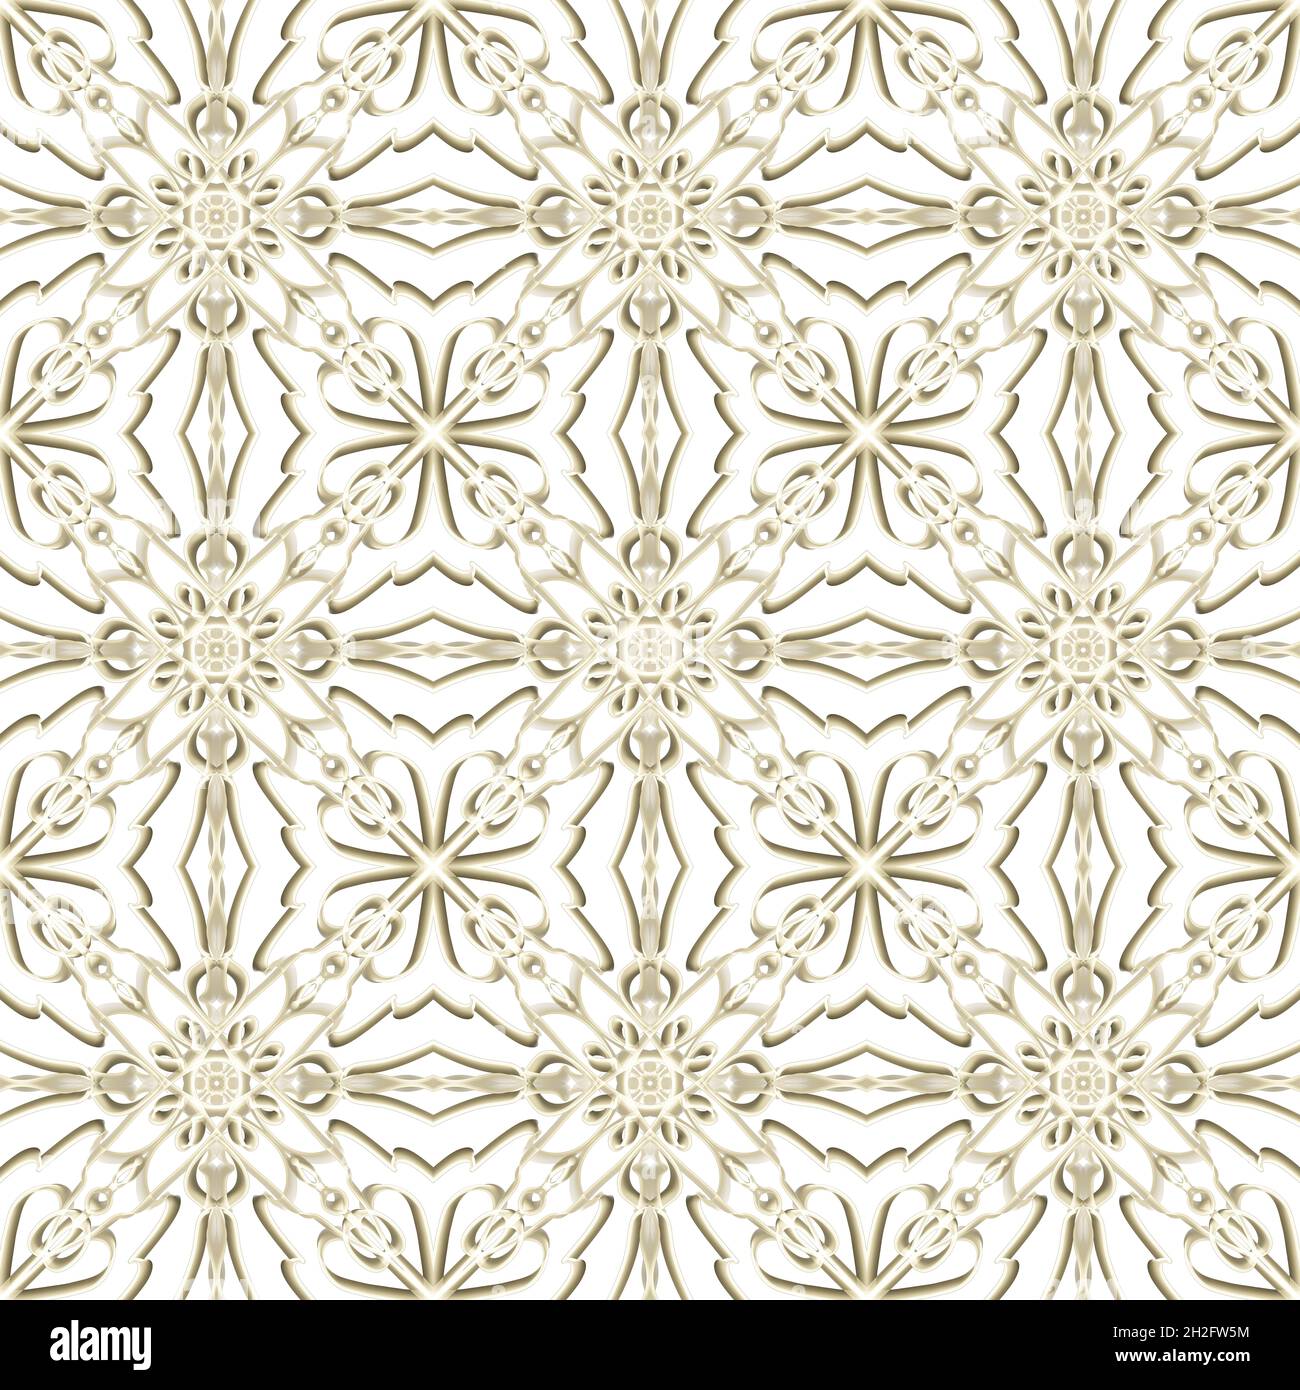 Seamless abstract geometric floral surface pattern in golden color with symmetrical form repeating horizontally and vertically. Use for fashion design Stock Photo